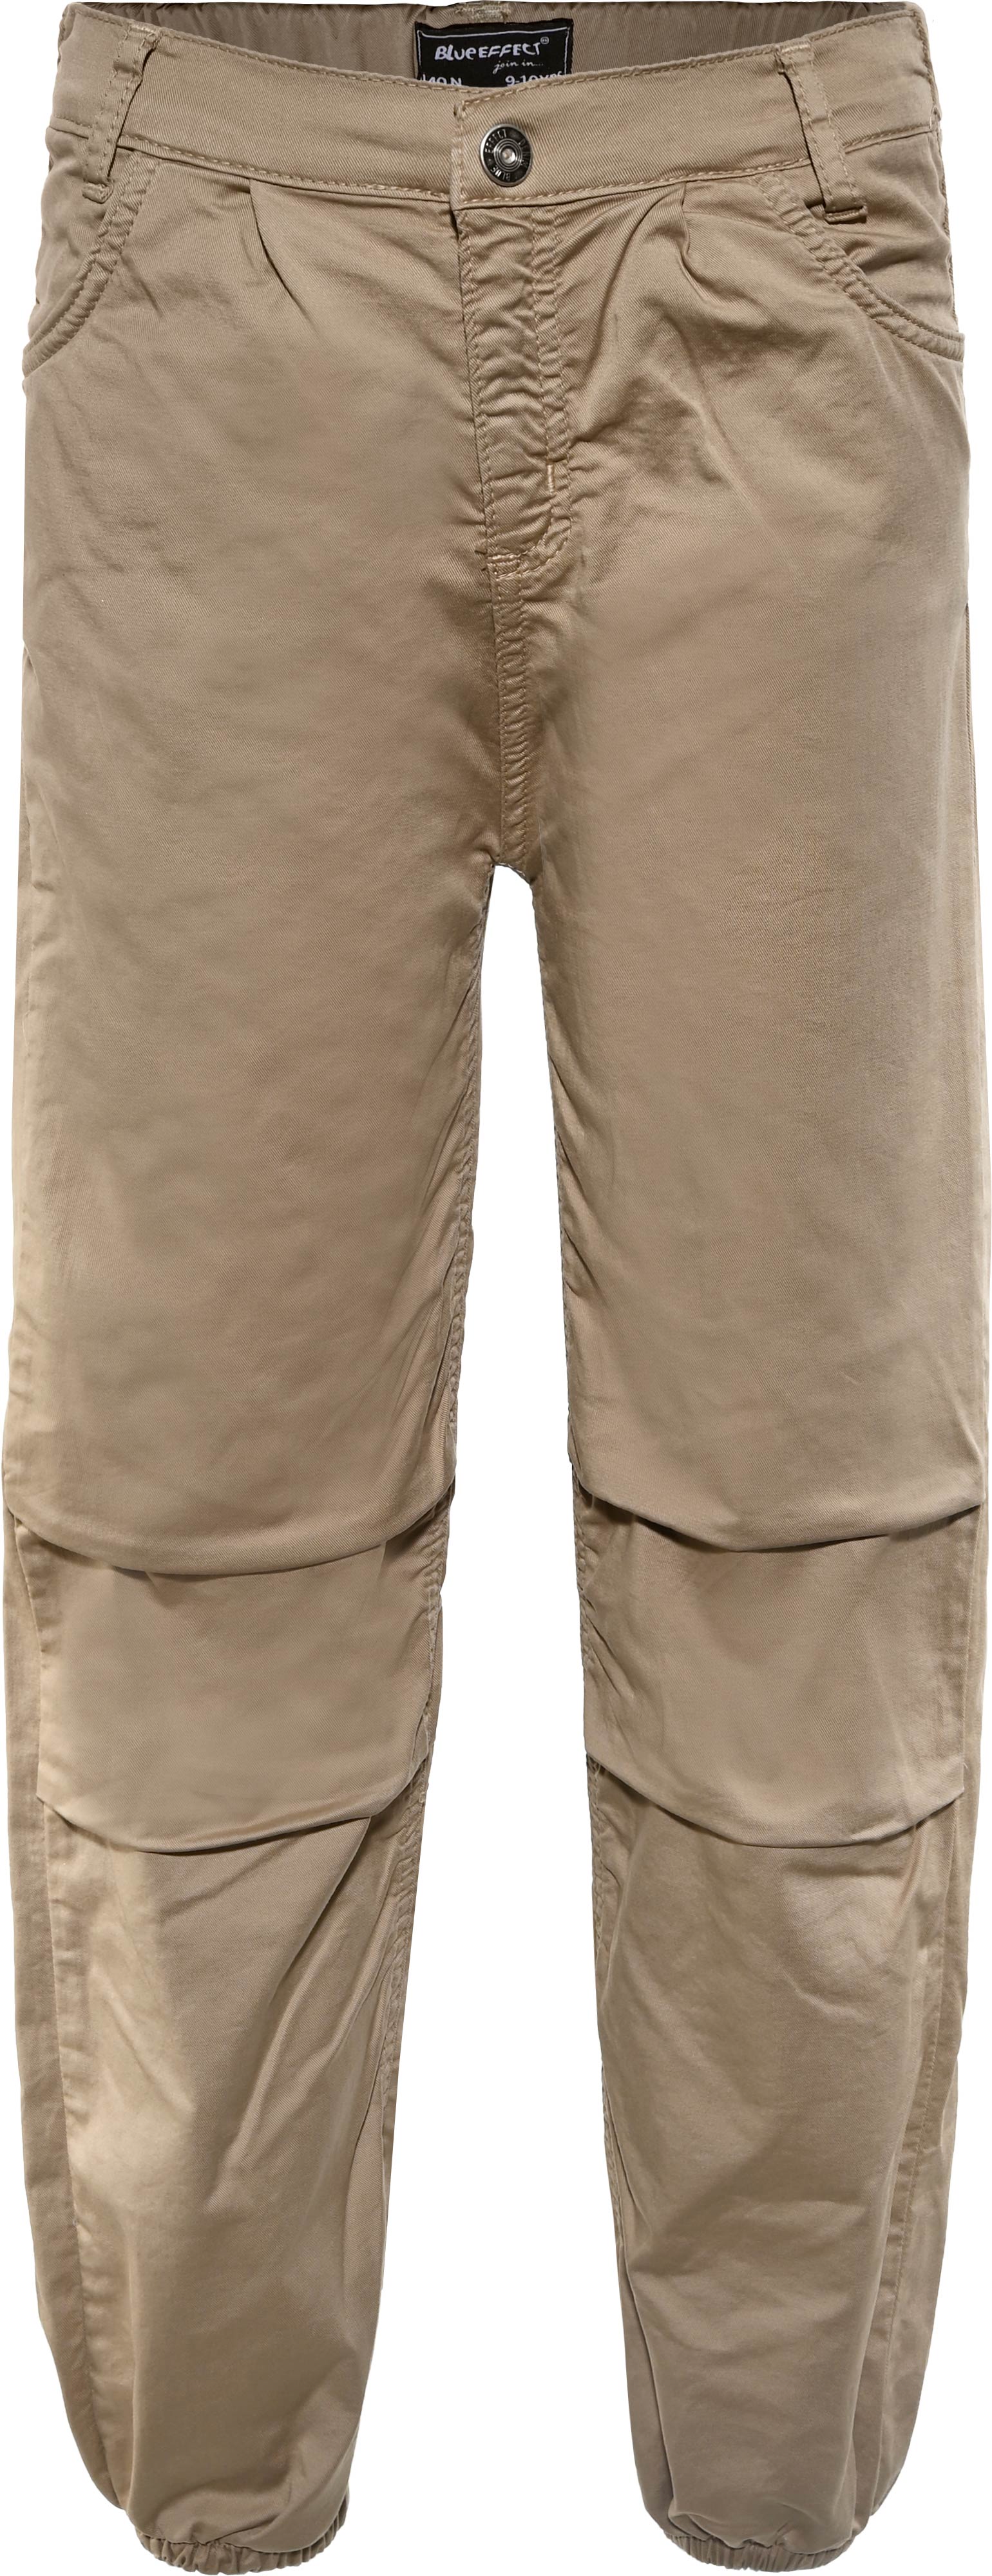 2874-Boys Parachute Pant avaible in Normal